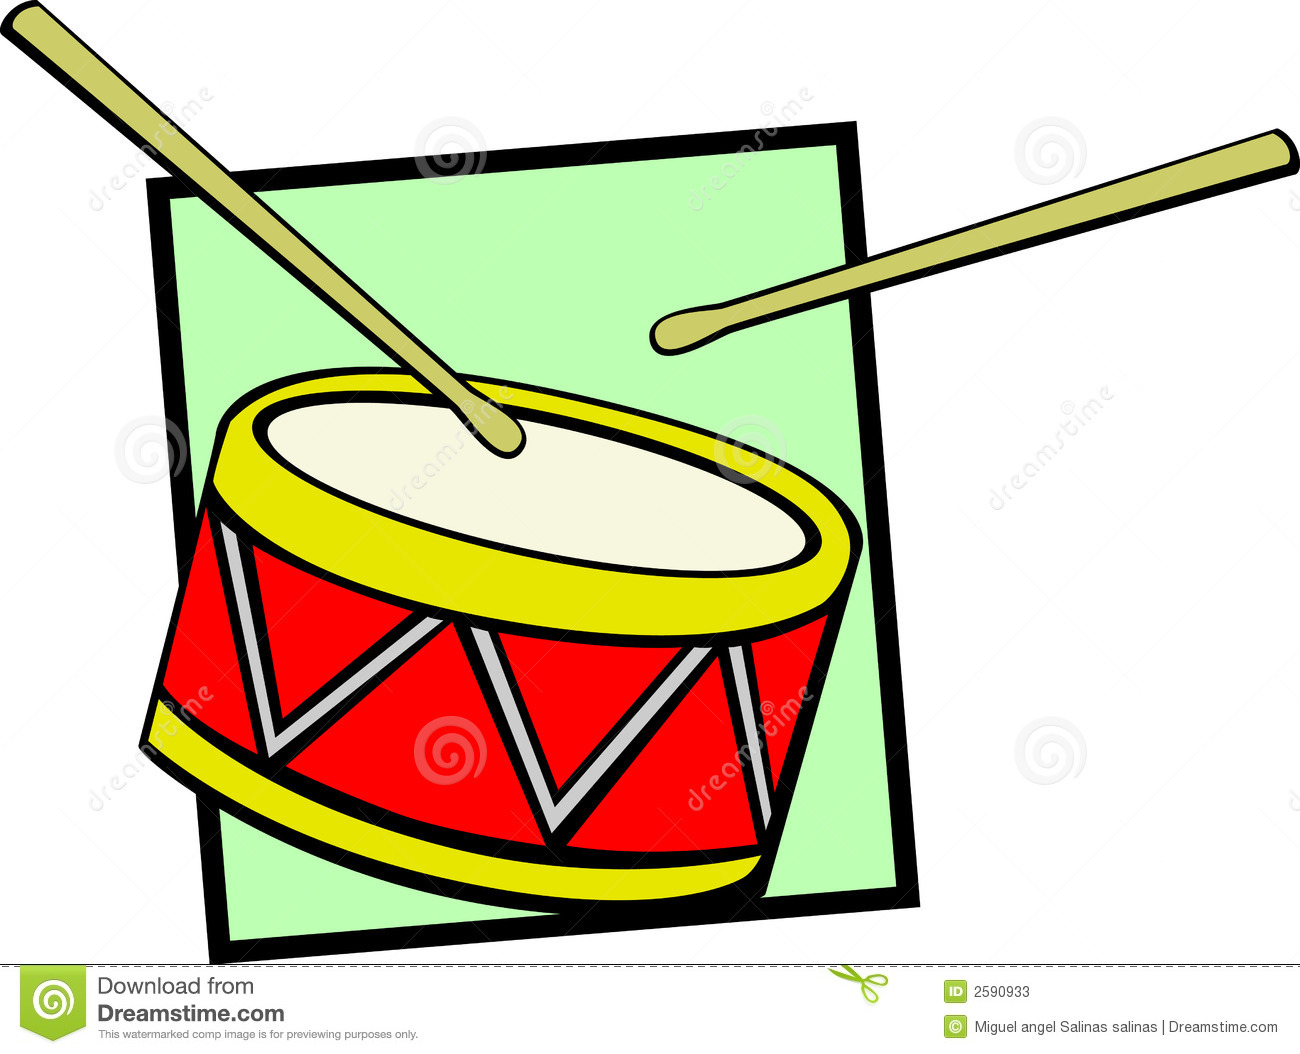 Drum Clipart Black And White   Clipart Panda   Free Clipart Images